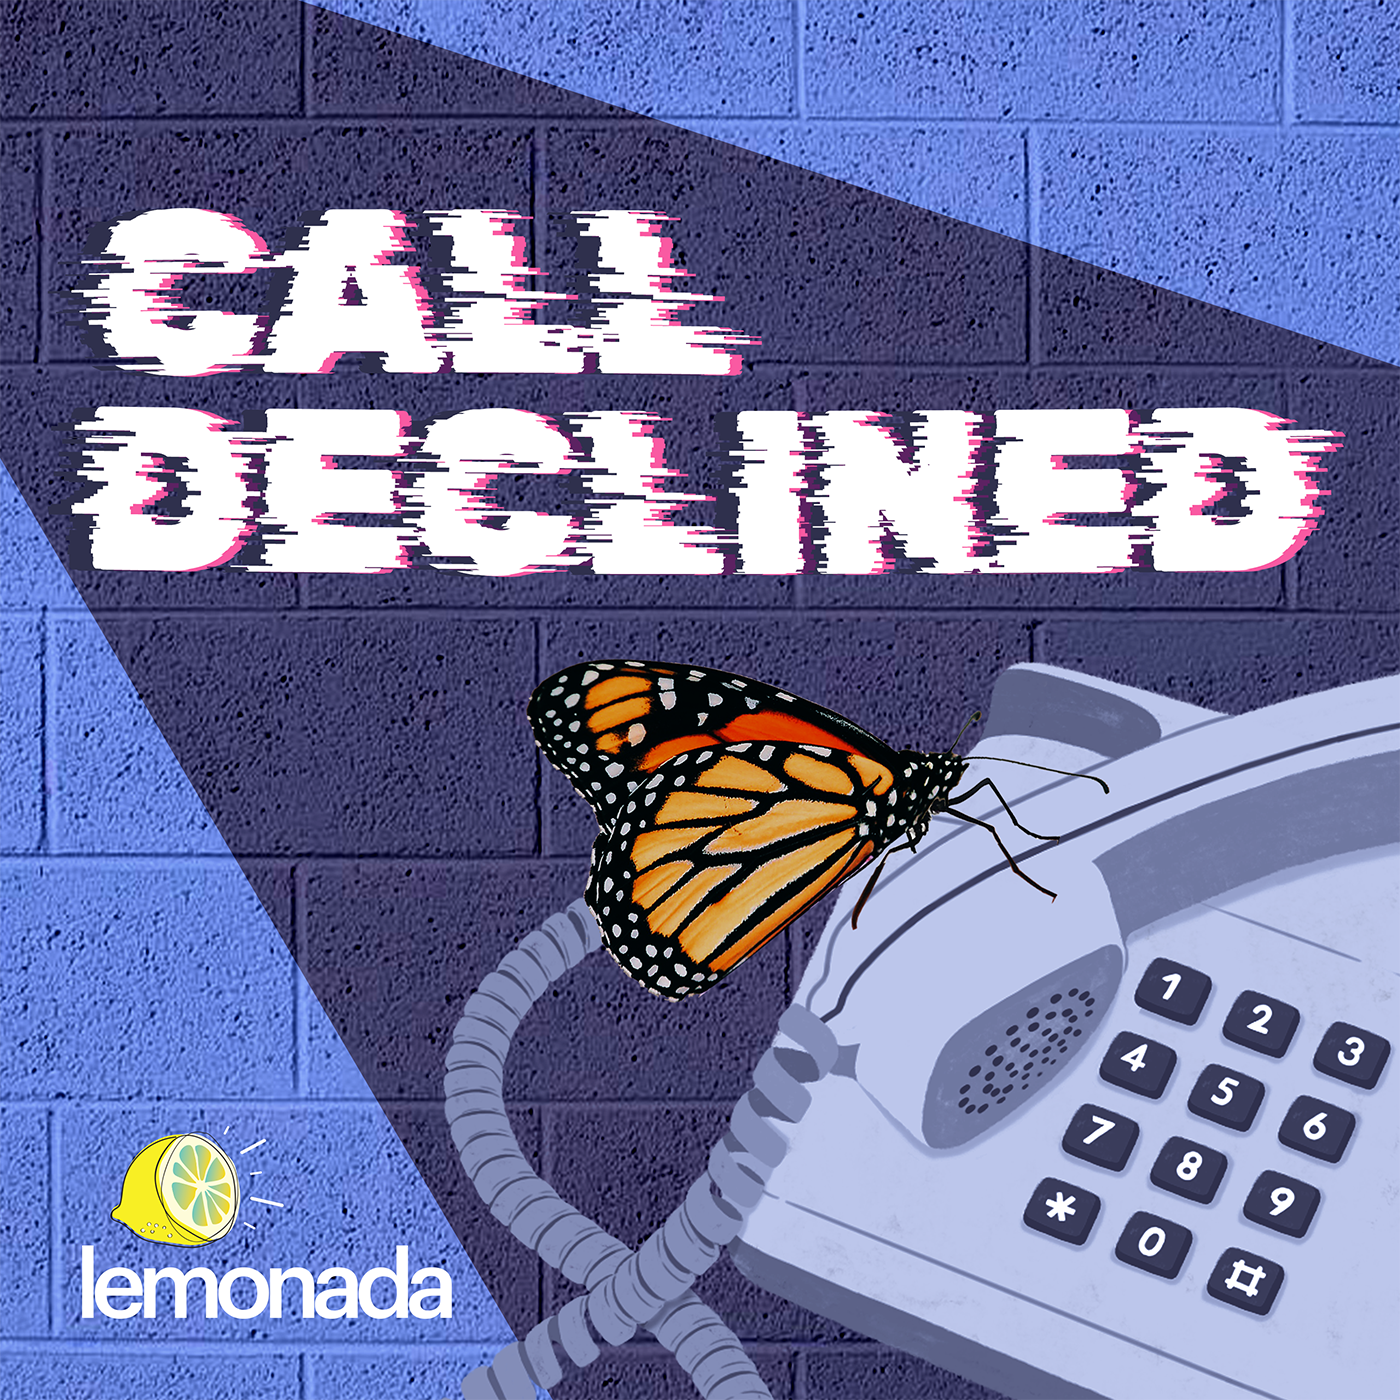 Call Declined: Life in Prison